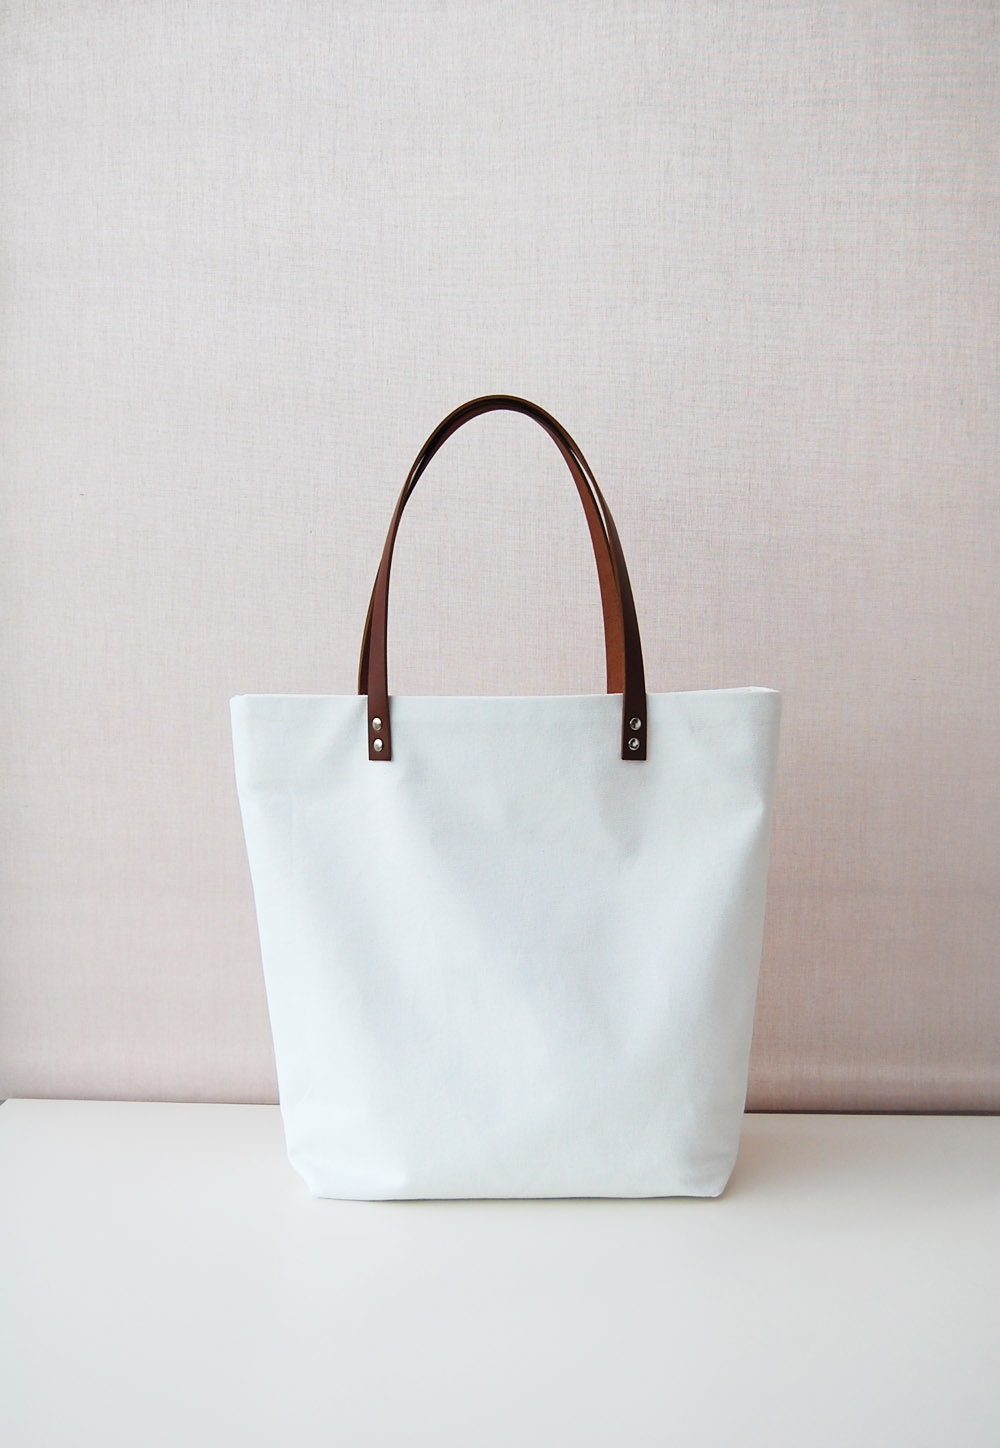 White Canvas tote bag with leather handles by ForestBags on Etsy